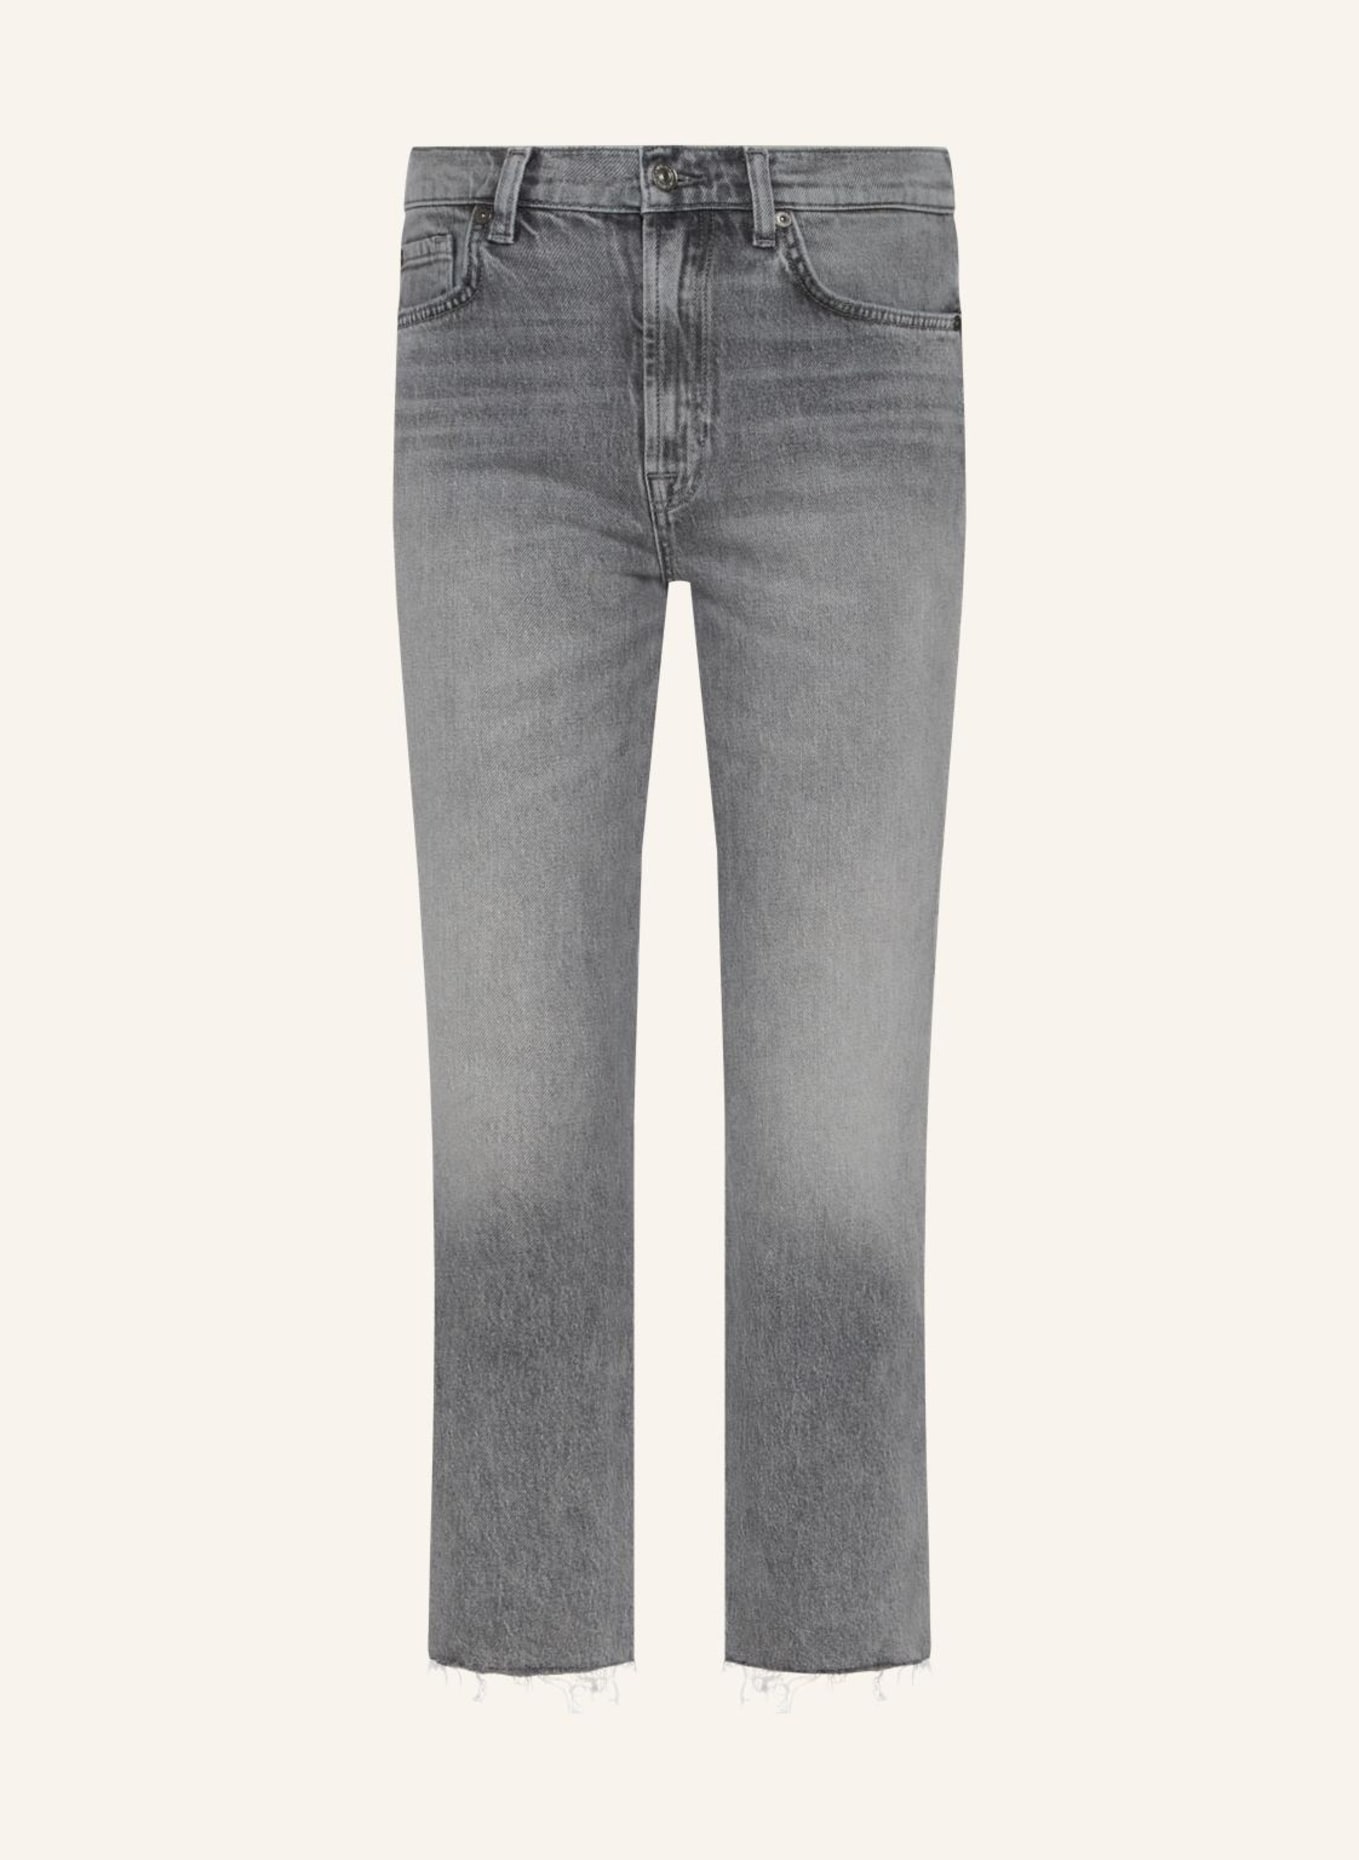 7 for all mankind Jeans LOGAN STOVEPIPE Straight Fit, Farbe: GRAU (Bild 1)